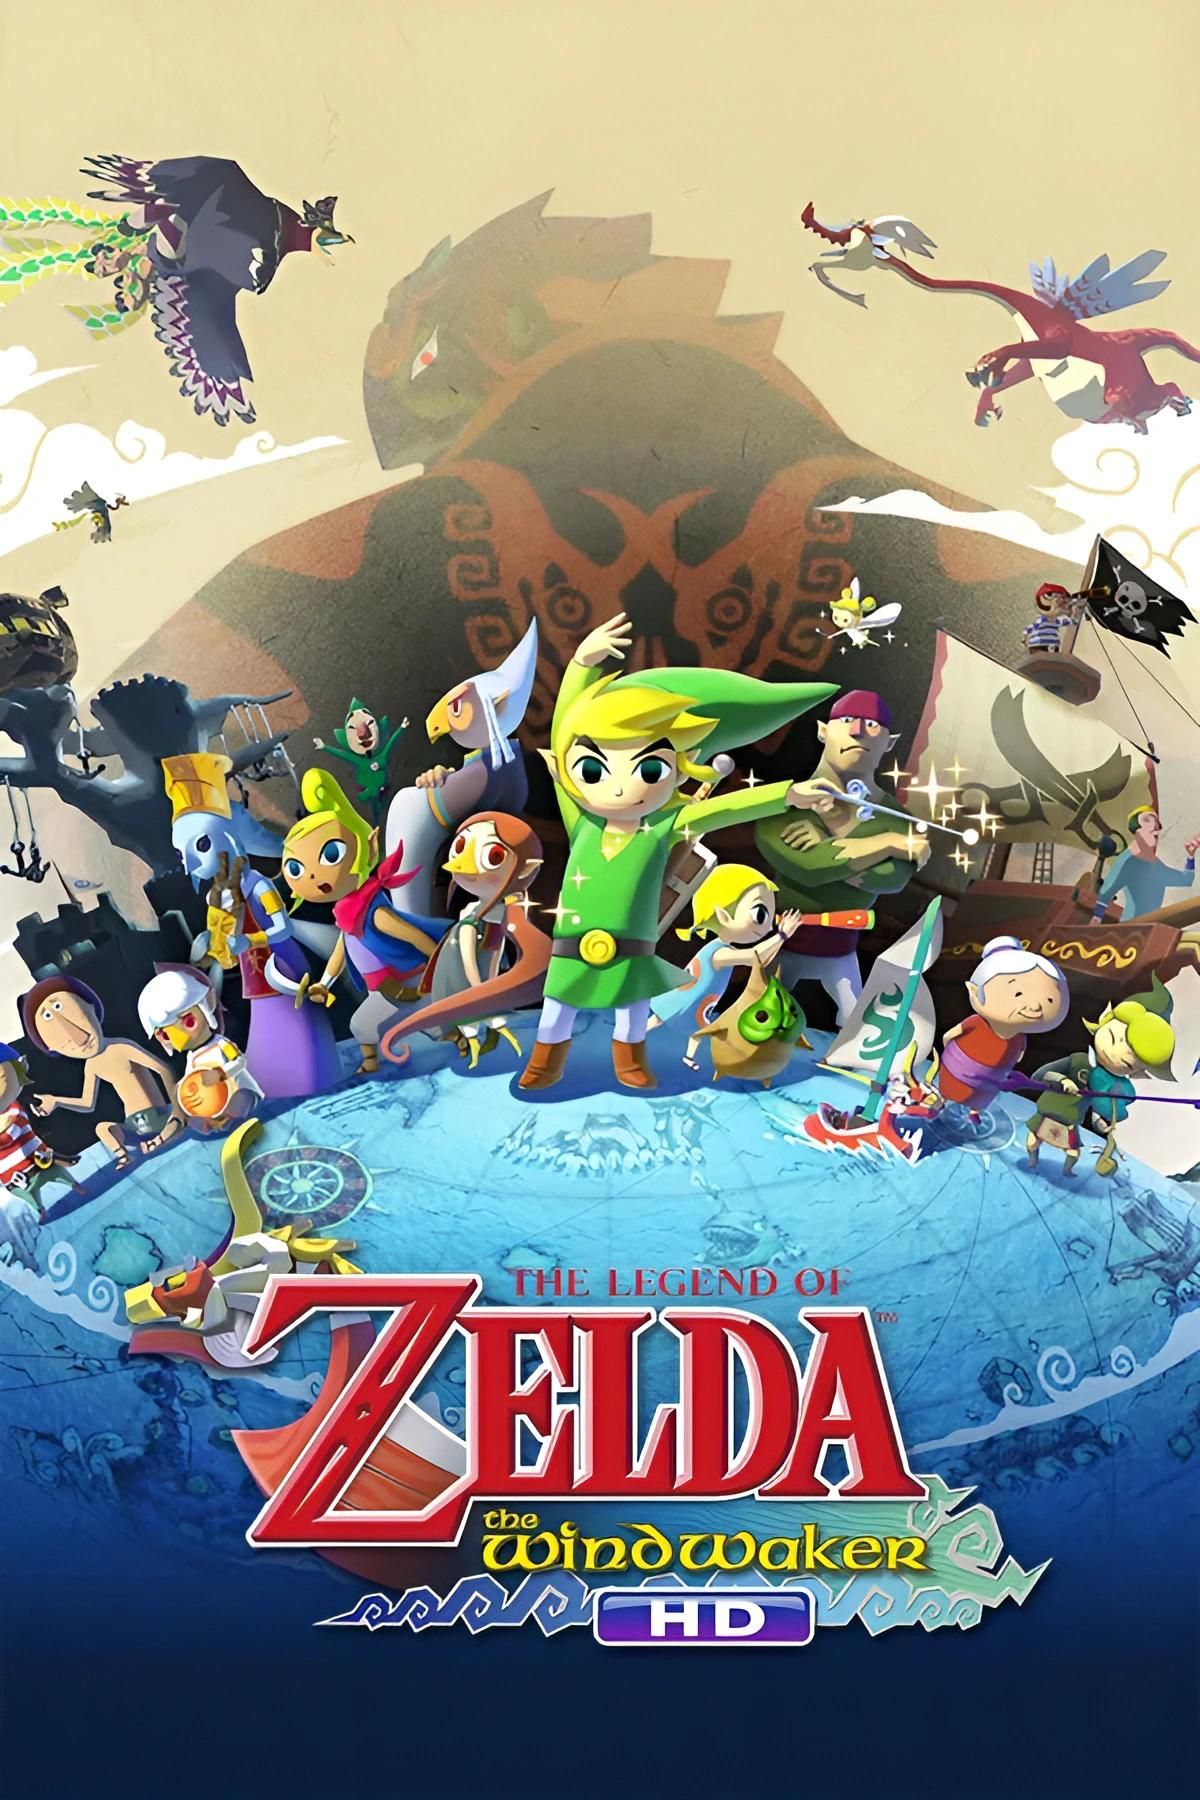 How The Wind Waker Has Influenced Zelda For 20 Years